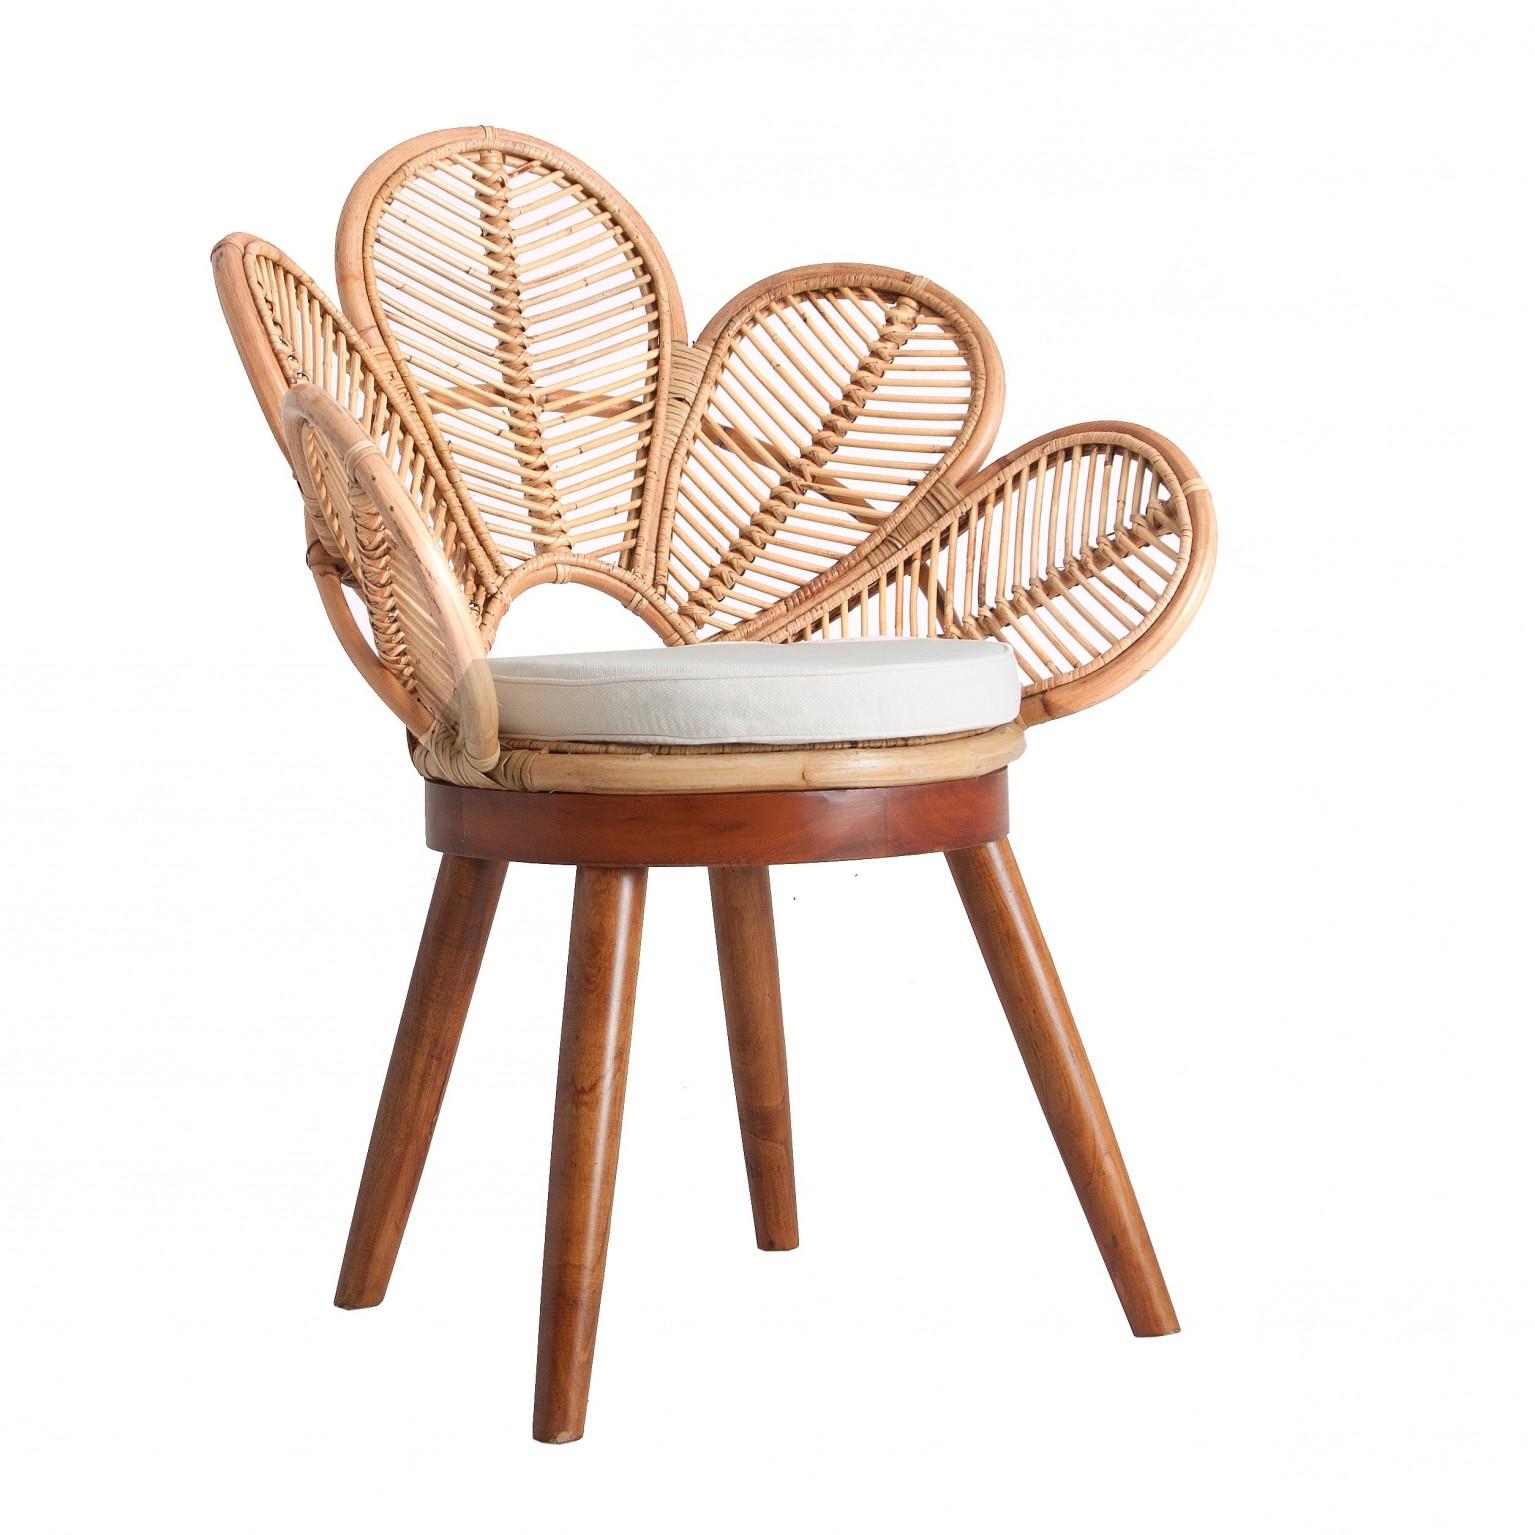 Set of four gorgeous armchairs: rattan flower petal shaped seats, on mahogany wooden feets. They will be perfect on your terrace, in your veranda, around the swimming pool or the dining table. Poetic, elegant, aerial and colorful. All in excellent